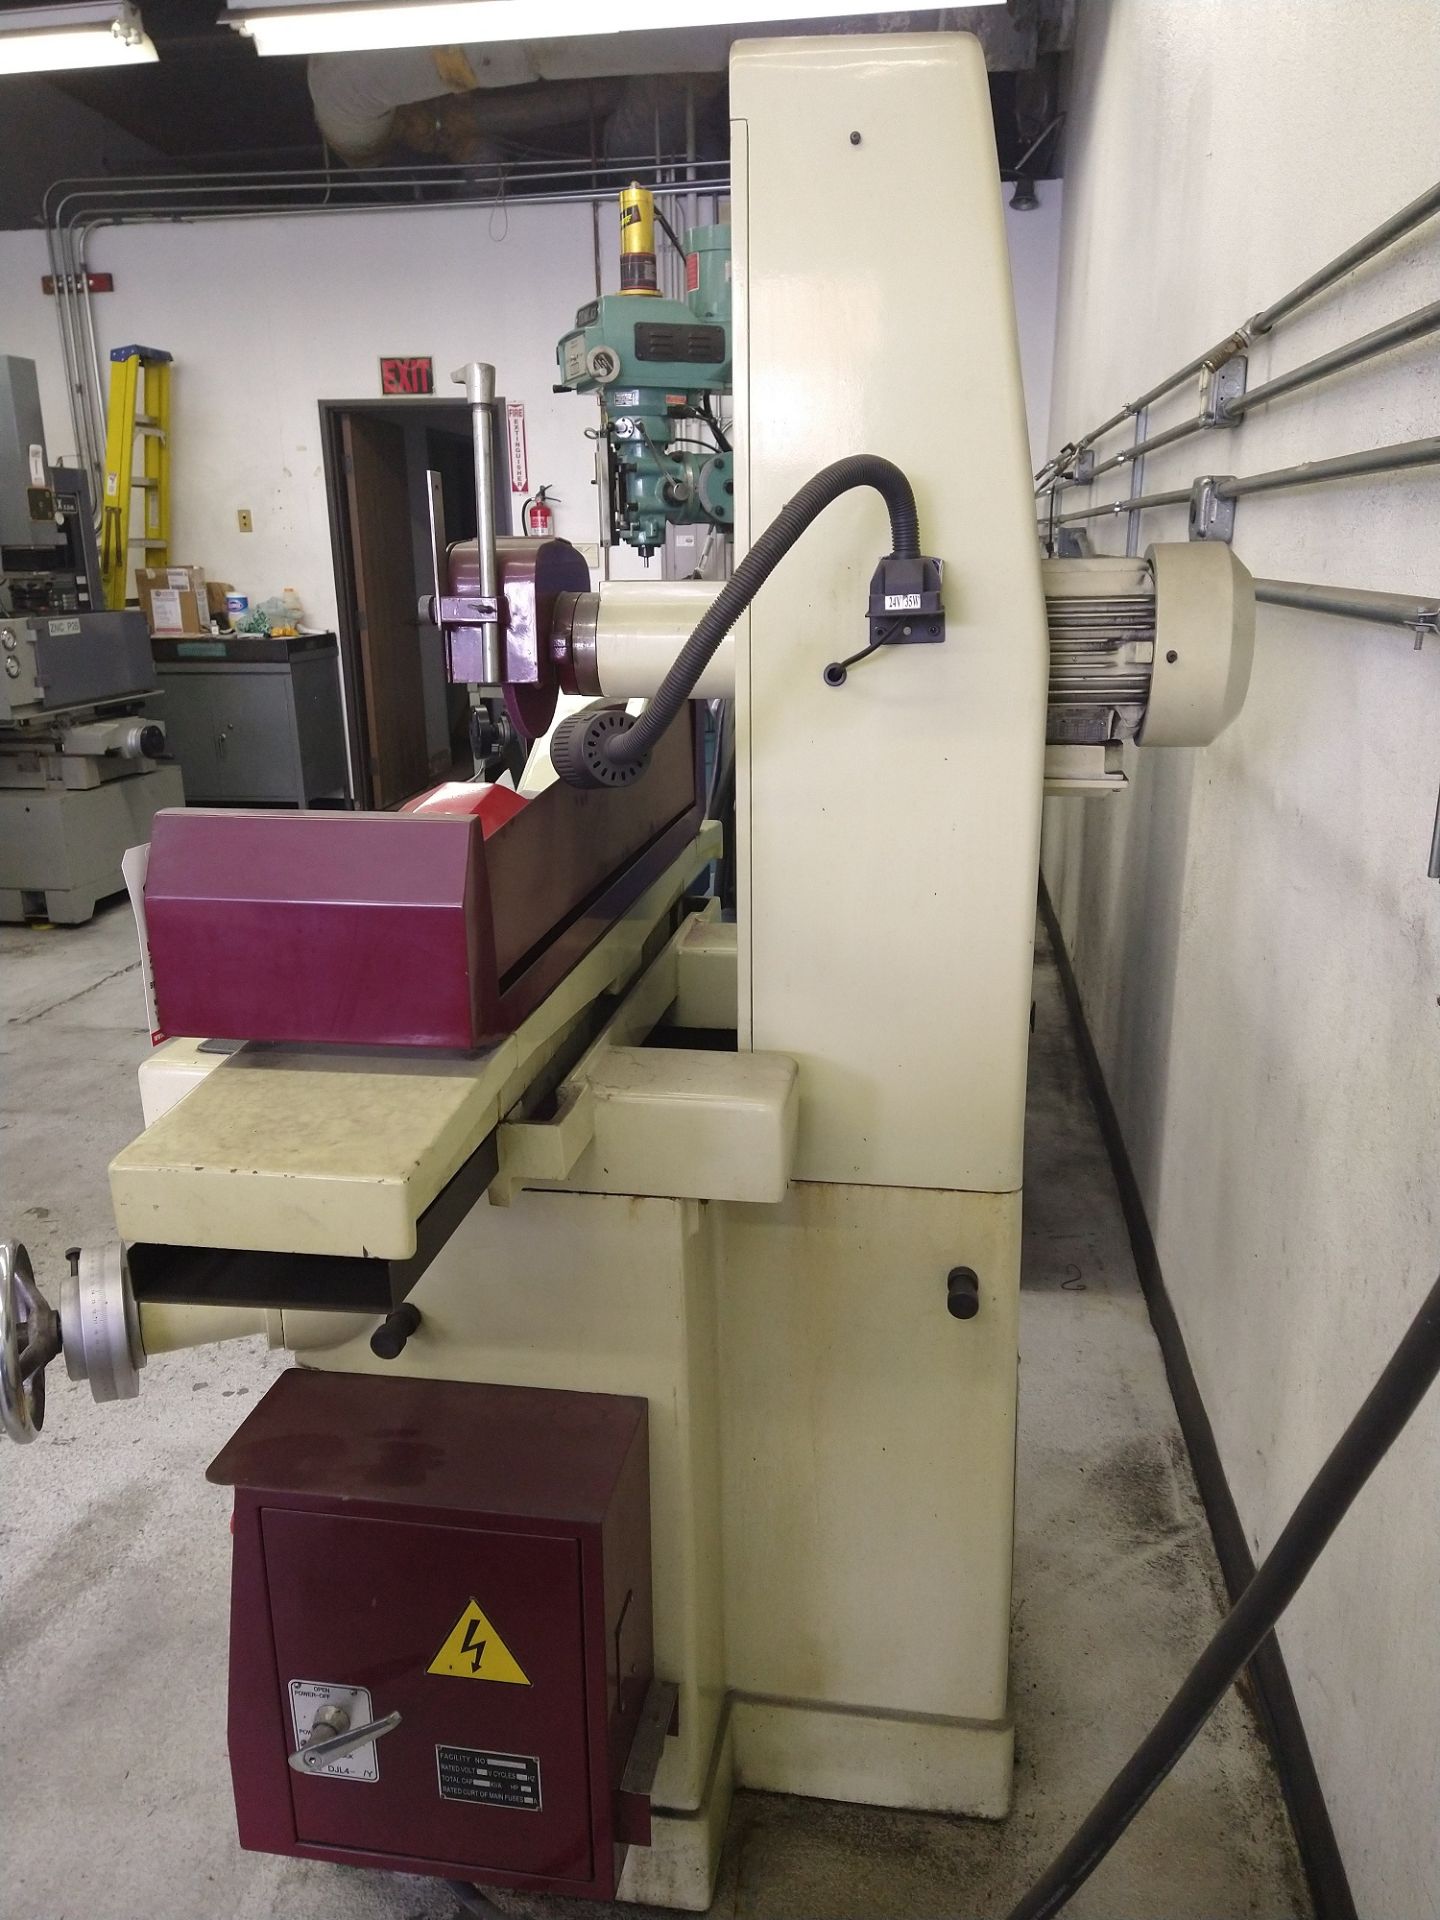 2007 KENT KGS618 SURFACE GRINDER, 6" X 18" MAGNETIC CHUCK - Image 6 of 6